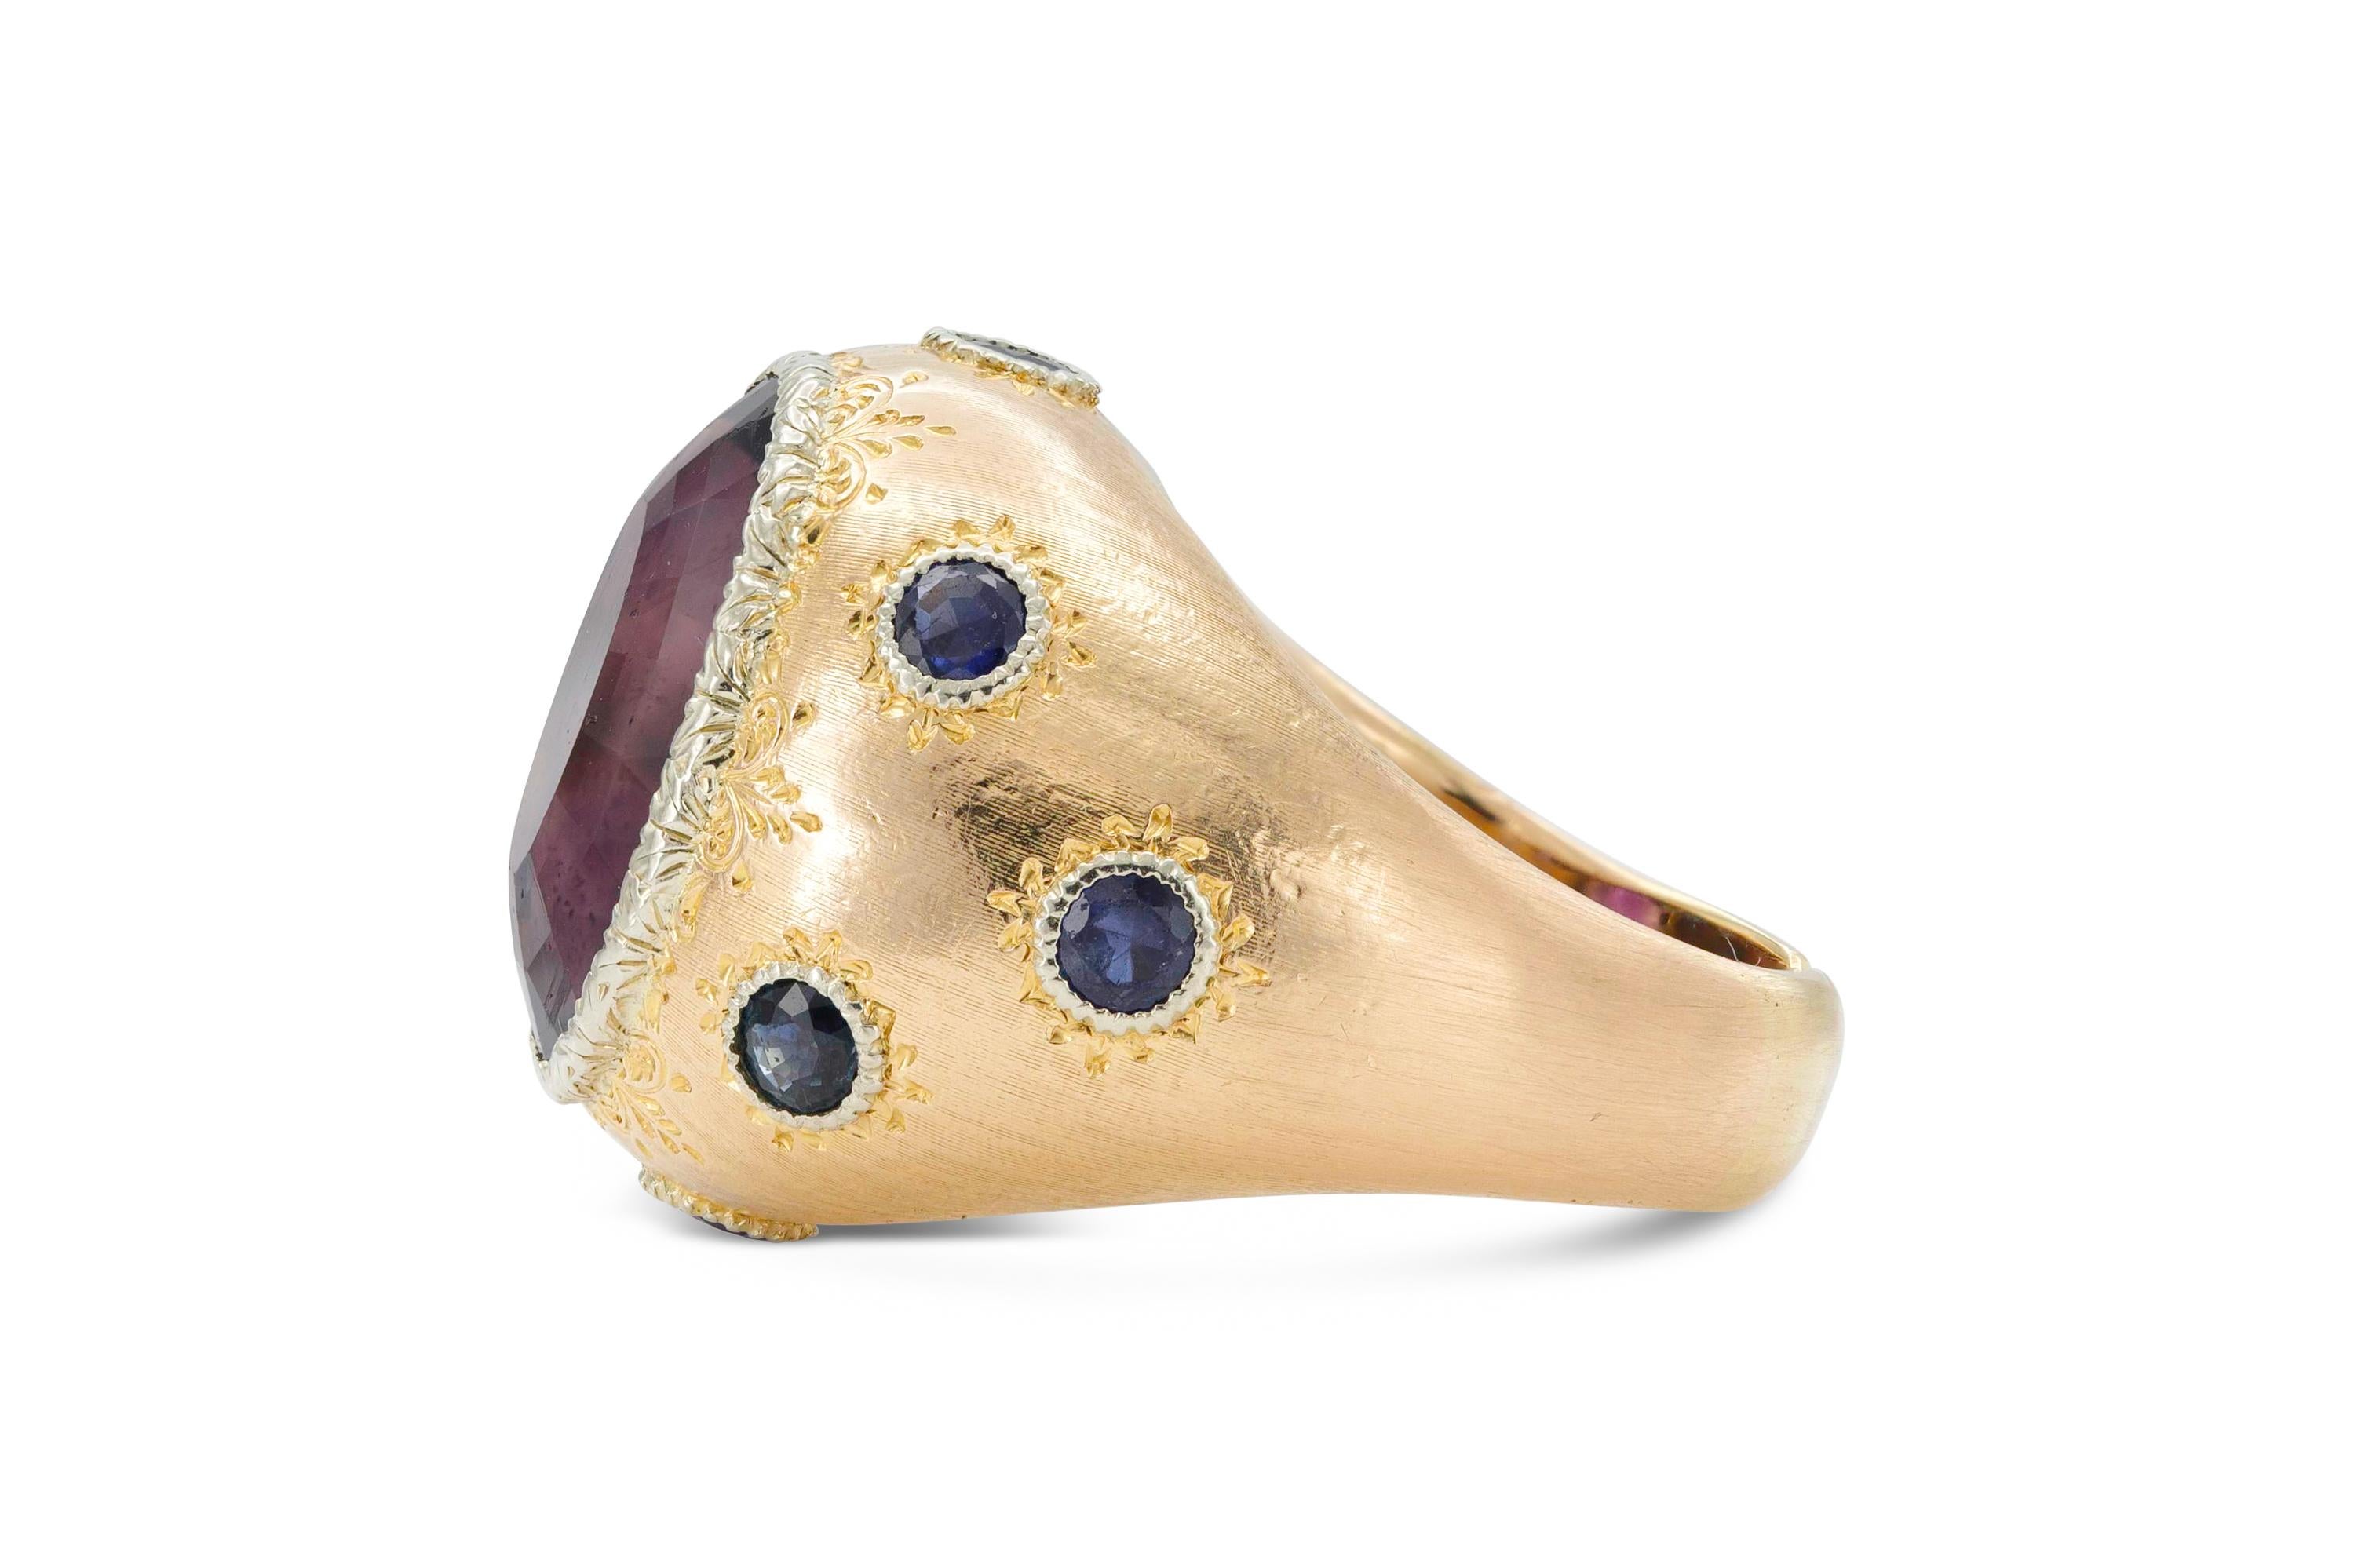 Finely crafted in 18K yellow gold with a center amethyst stone and surrounding sapphires.
Size 6 3/4.
Signed by Buccellati.